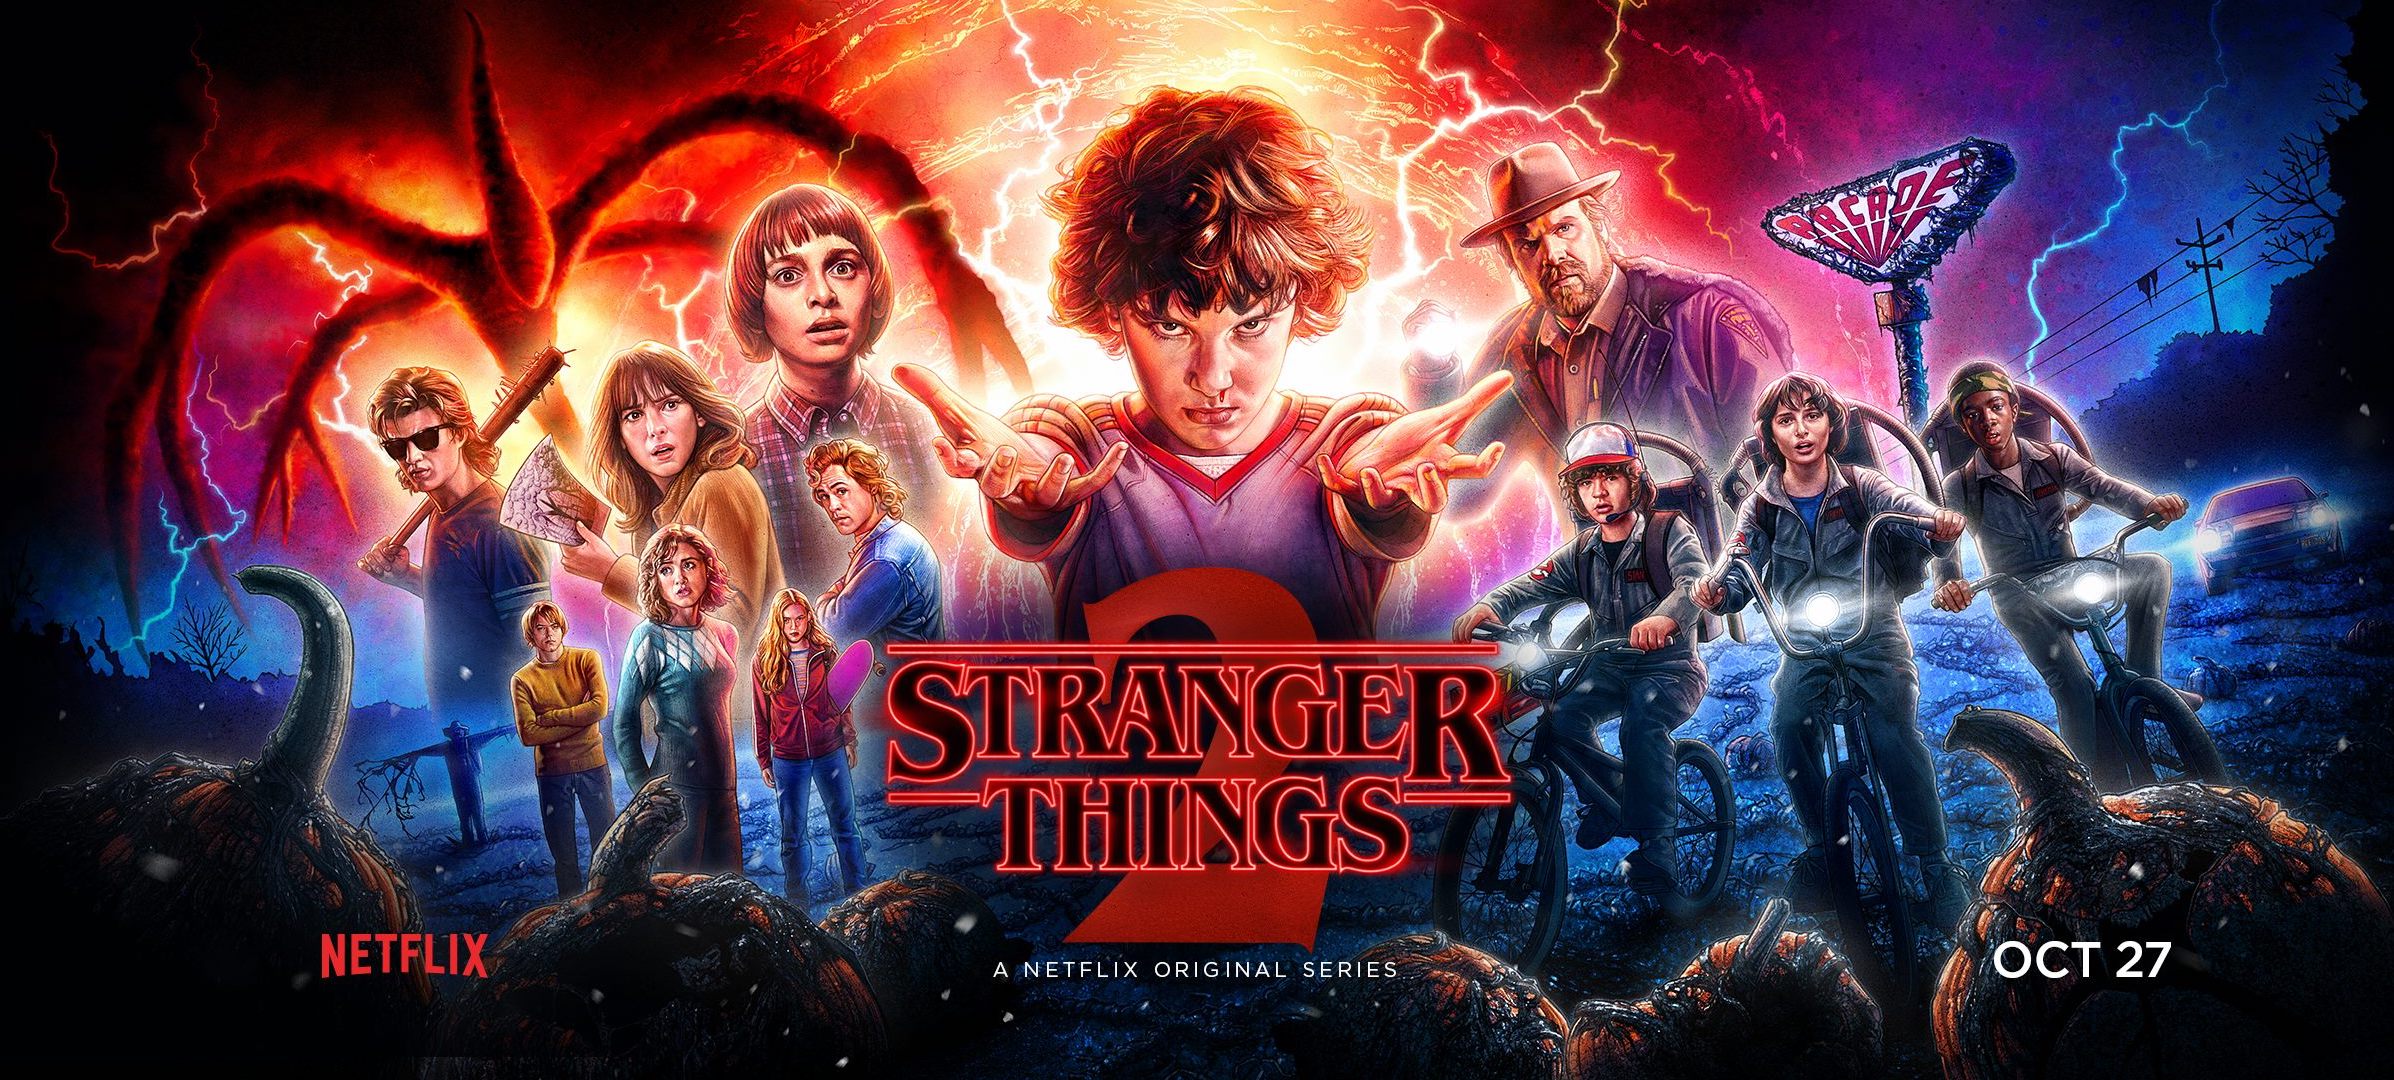 STRANGER THINGS: SEASON 2 brings the same great 80's nostalgia with mediocre plotting ...2394 x 1080